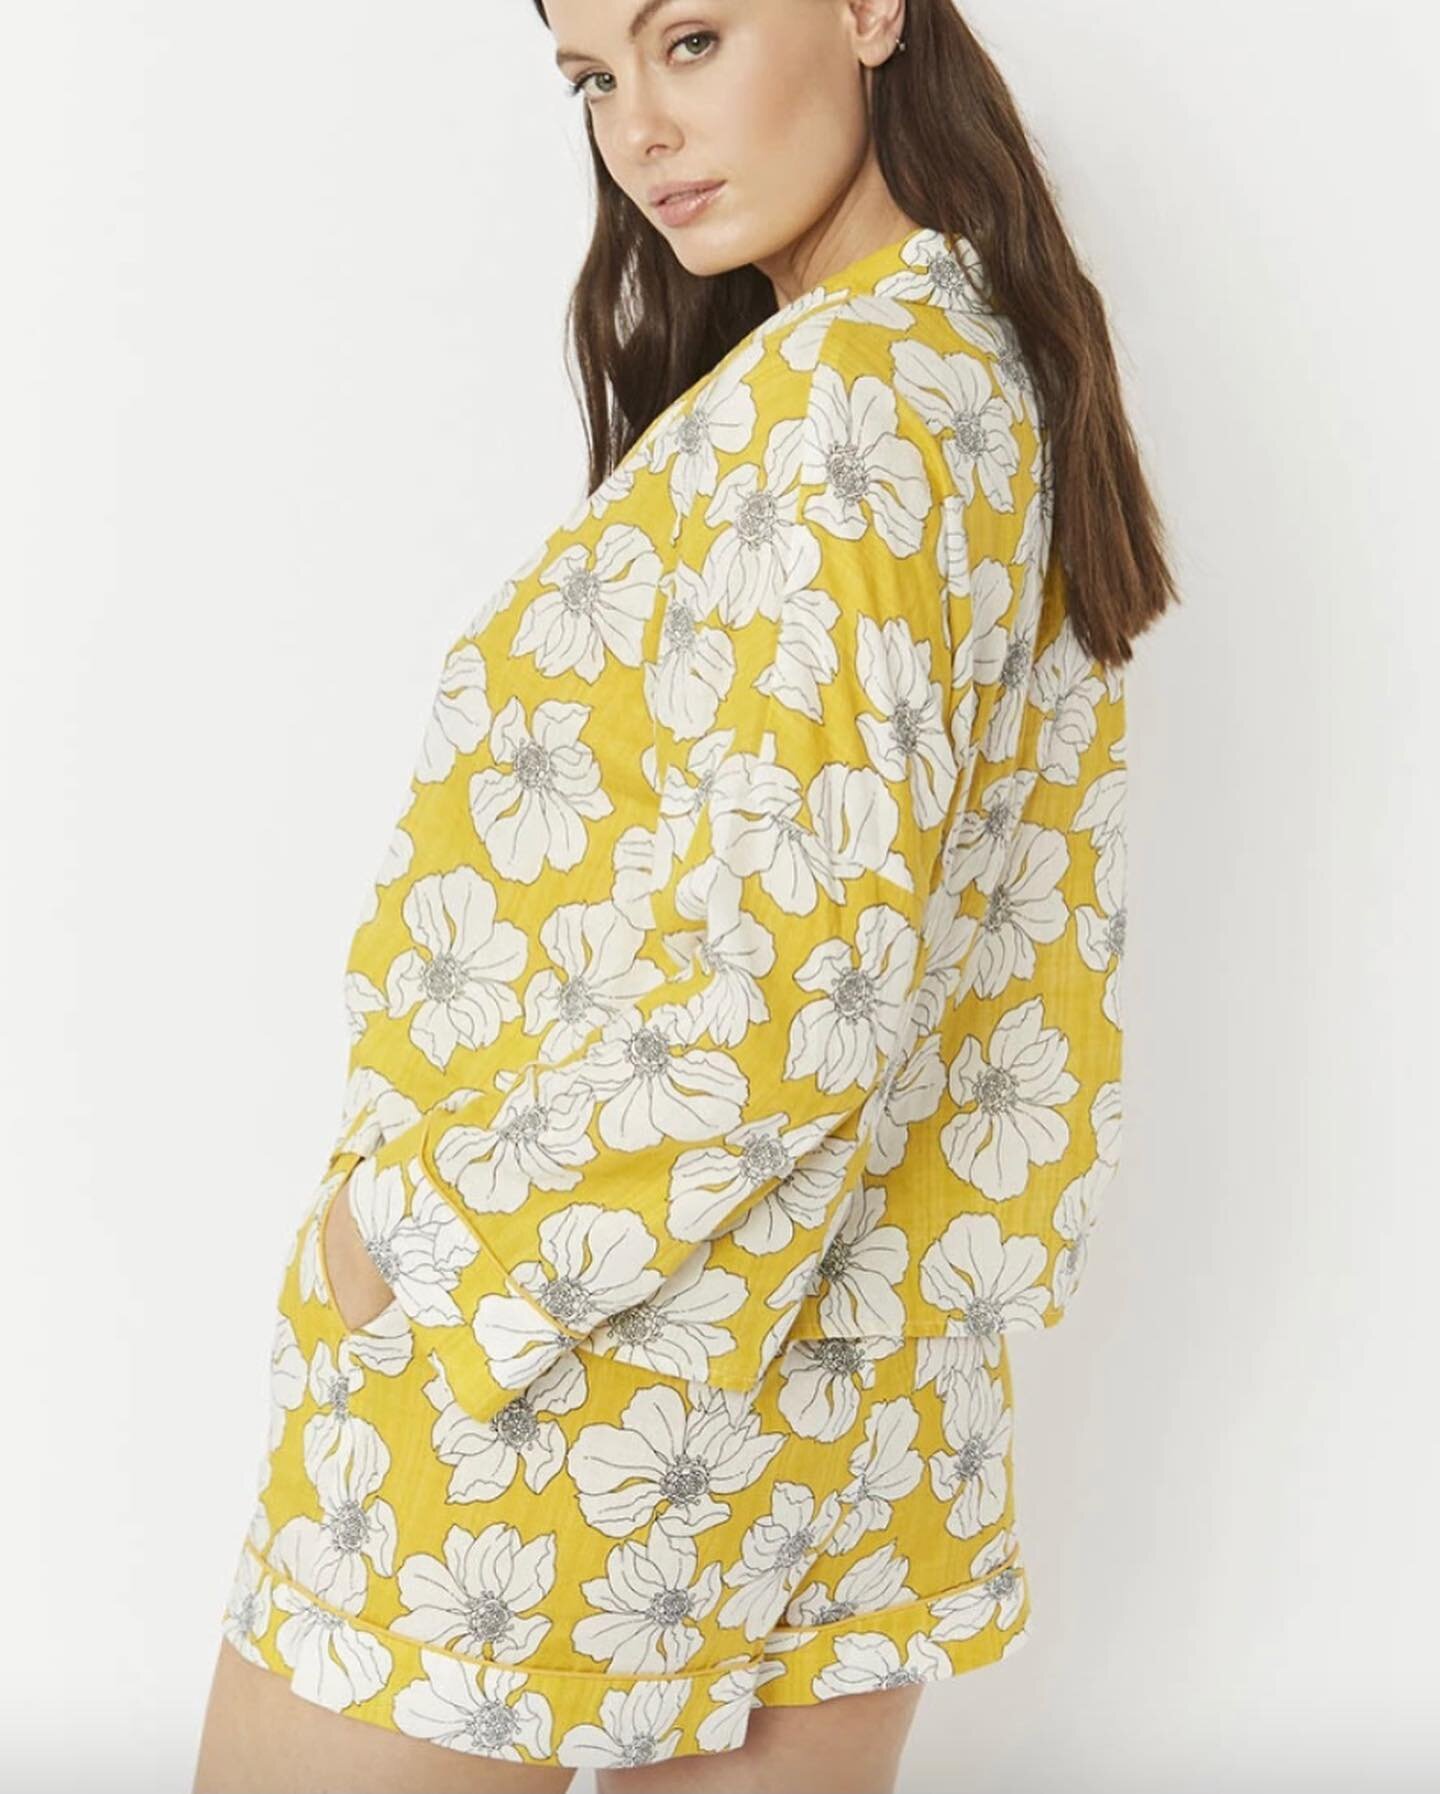 Gorgeous new yellow shirt PJs now in store! &pound;50 and one size 8-12UK 🌼🌼🌼
.
.
.
.
#pyjama #pajama #pjs #shirtstyle #springstyle #springpjs #todayimwearing #outfitpost #shoplocal #shoppinguk #londonshop #londonboutique #discoverunder5k #pitshan